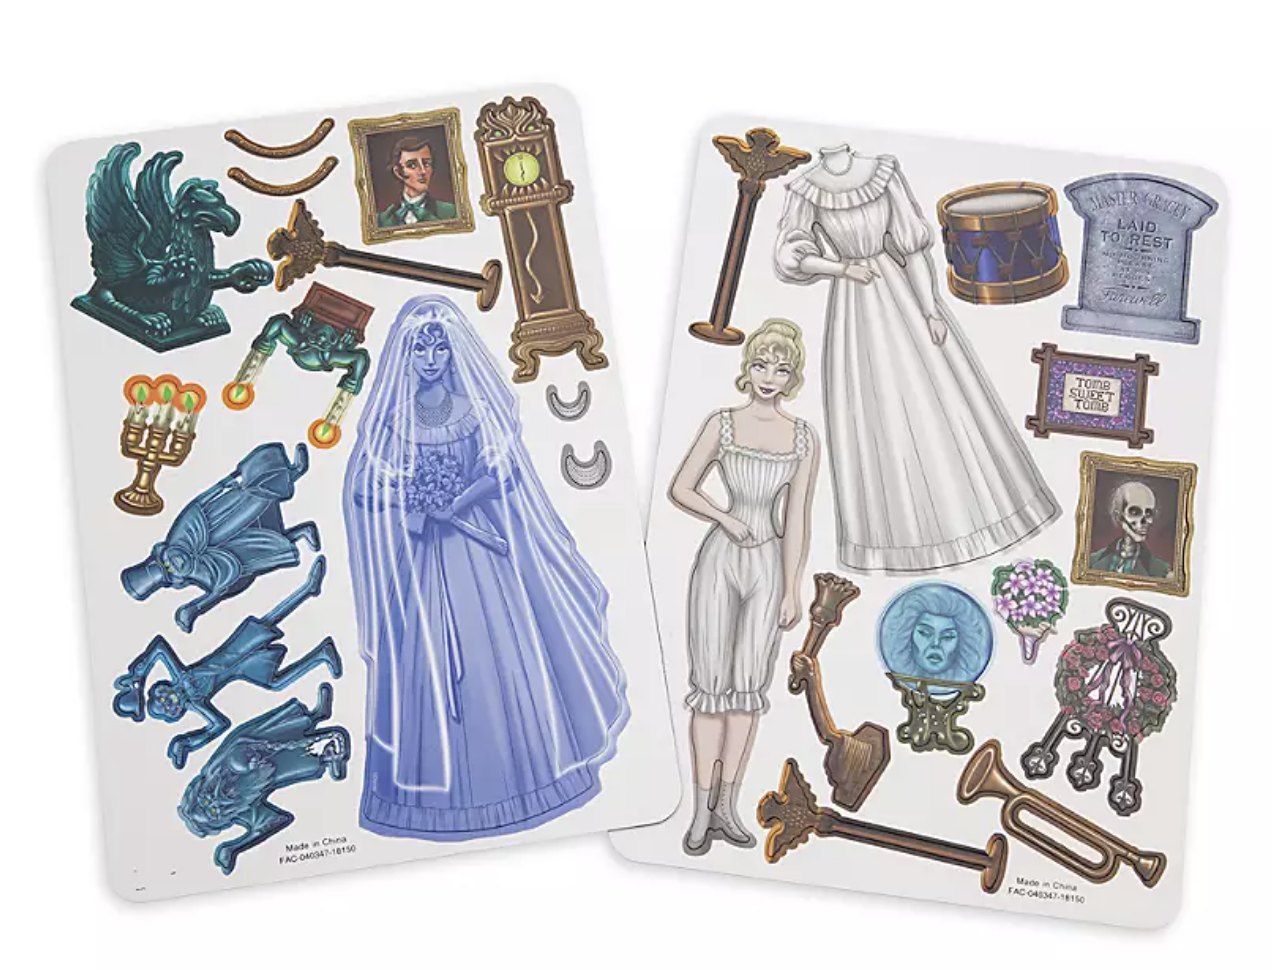 two sheets of magnets including an array of recognizable items from the haunted mansion ride